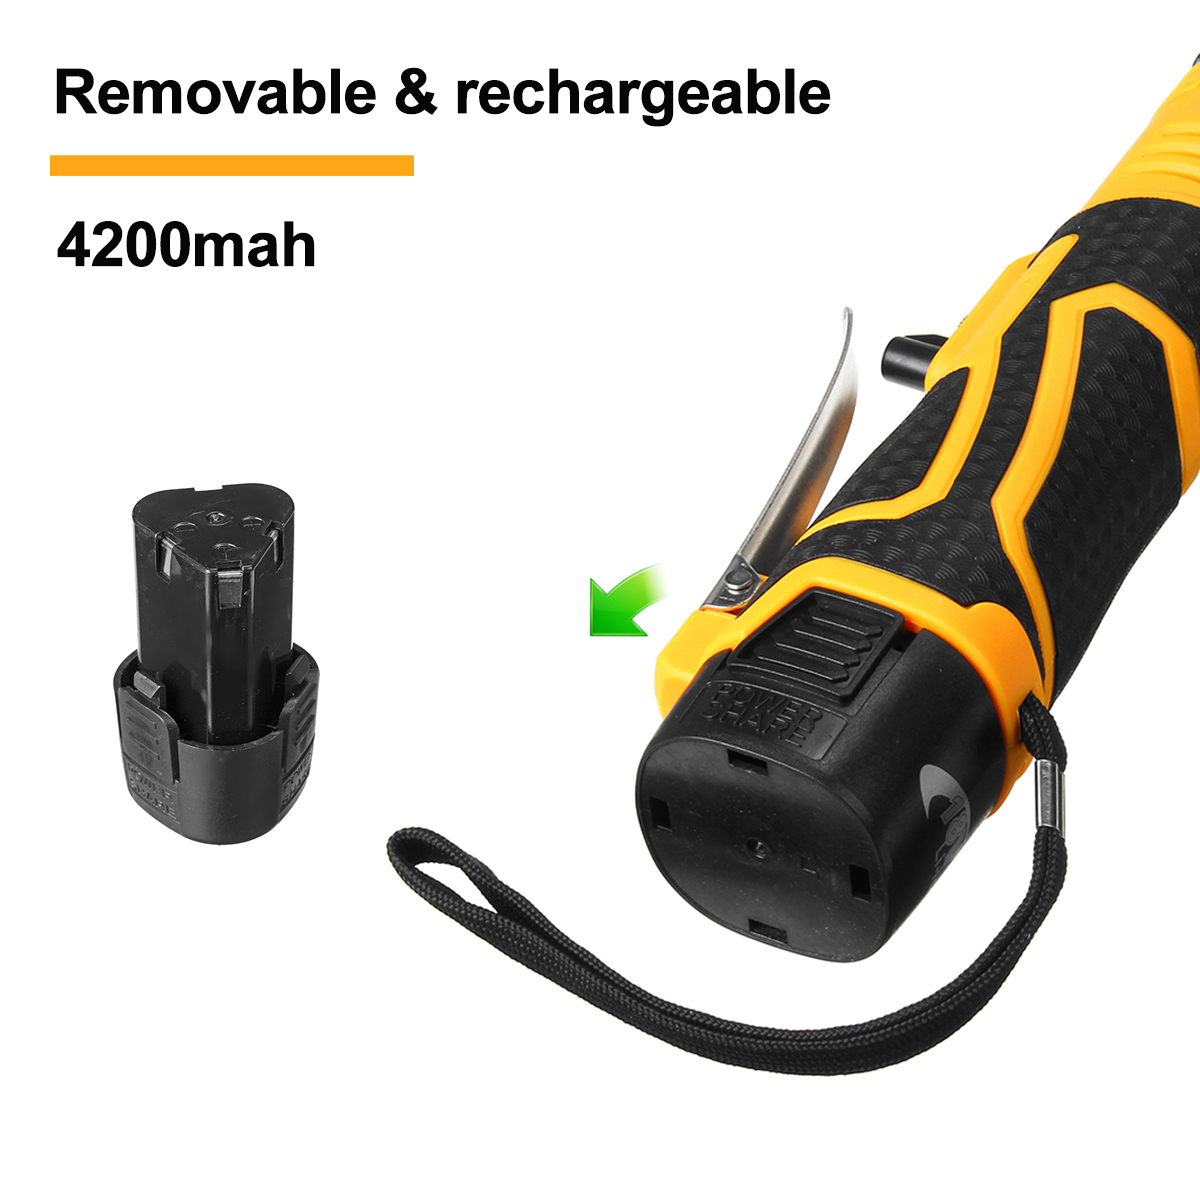 18V-Power-Cordless-Ratchet-Wrench-Li-ion-Electric-Wrench-4200mah-Max-Torque-65-Compact-Size-Battery--1560568-5